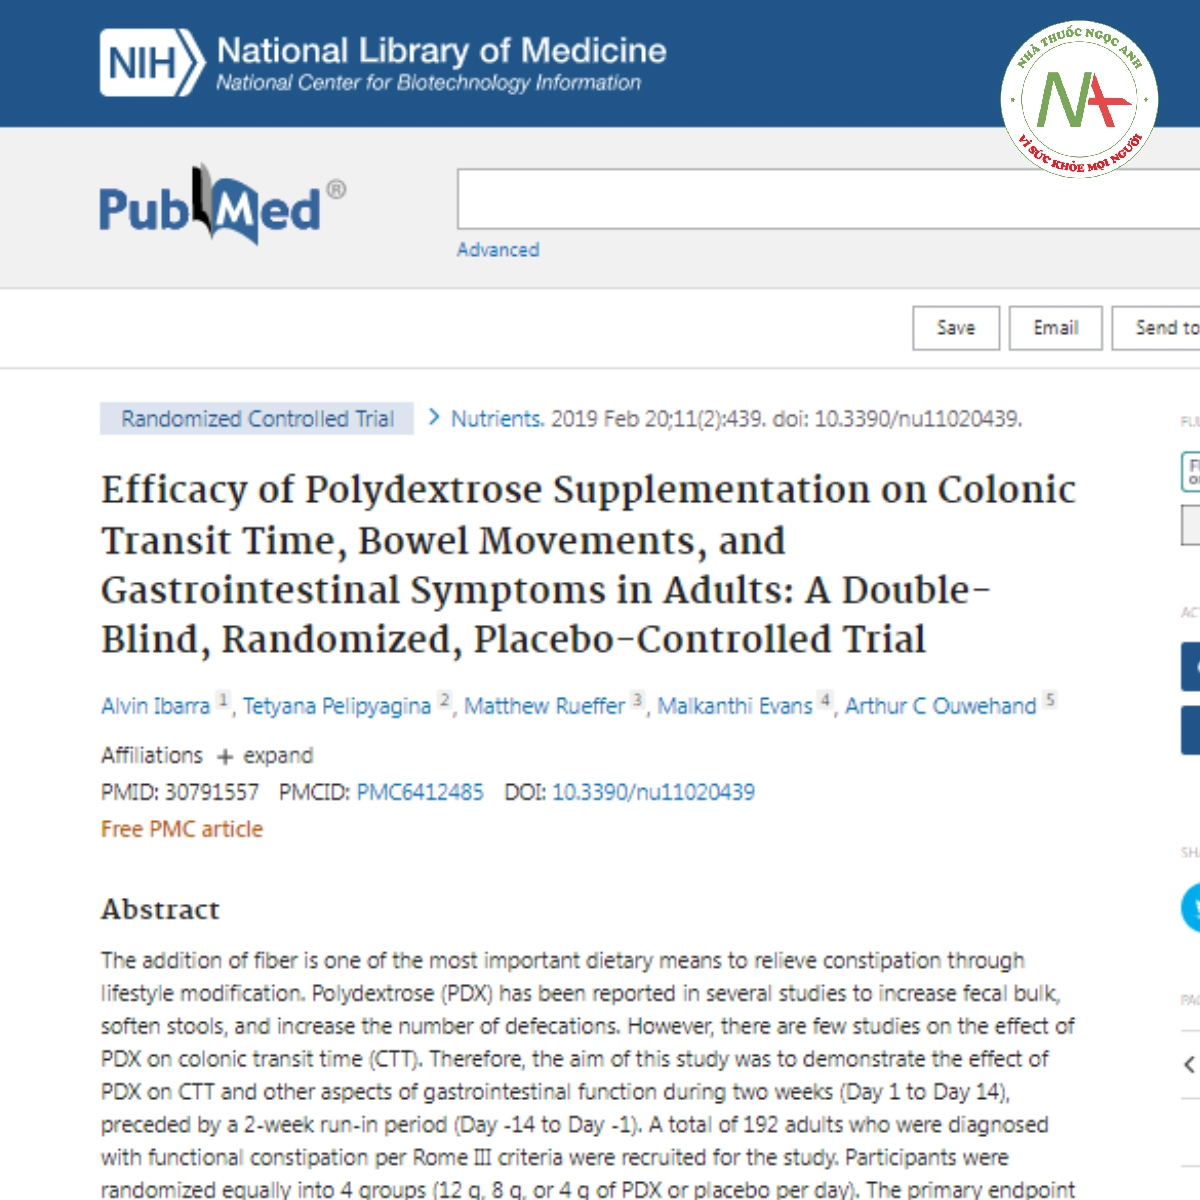 Efficacy of Polydextrose Supplementation on Colonic Transit Time, Bowel Movements, and Gastrointestinal Symptoms in Adults_ A Double-Blind, Randomized, Placebo-Controlled Trial